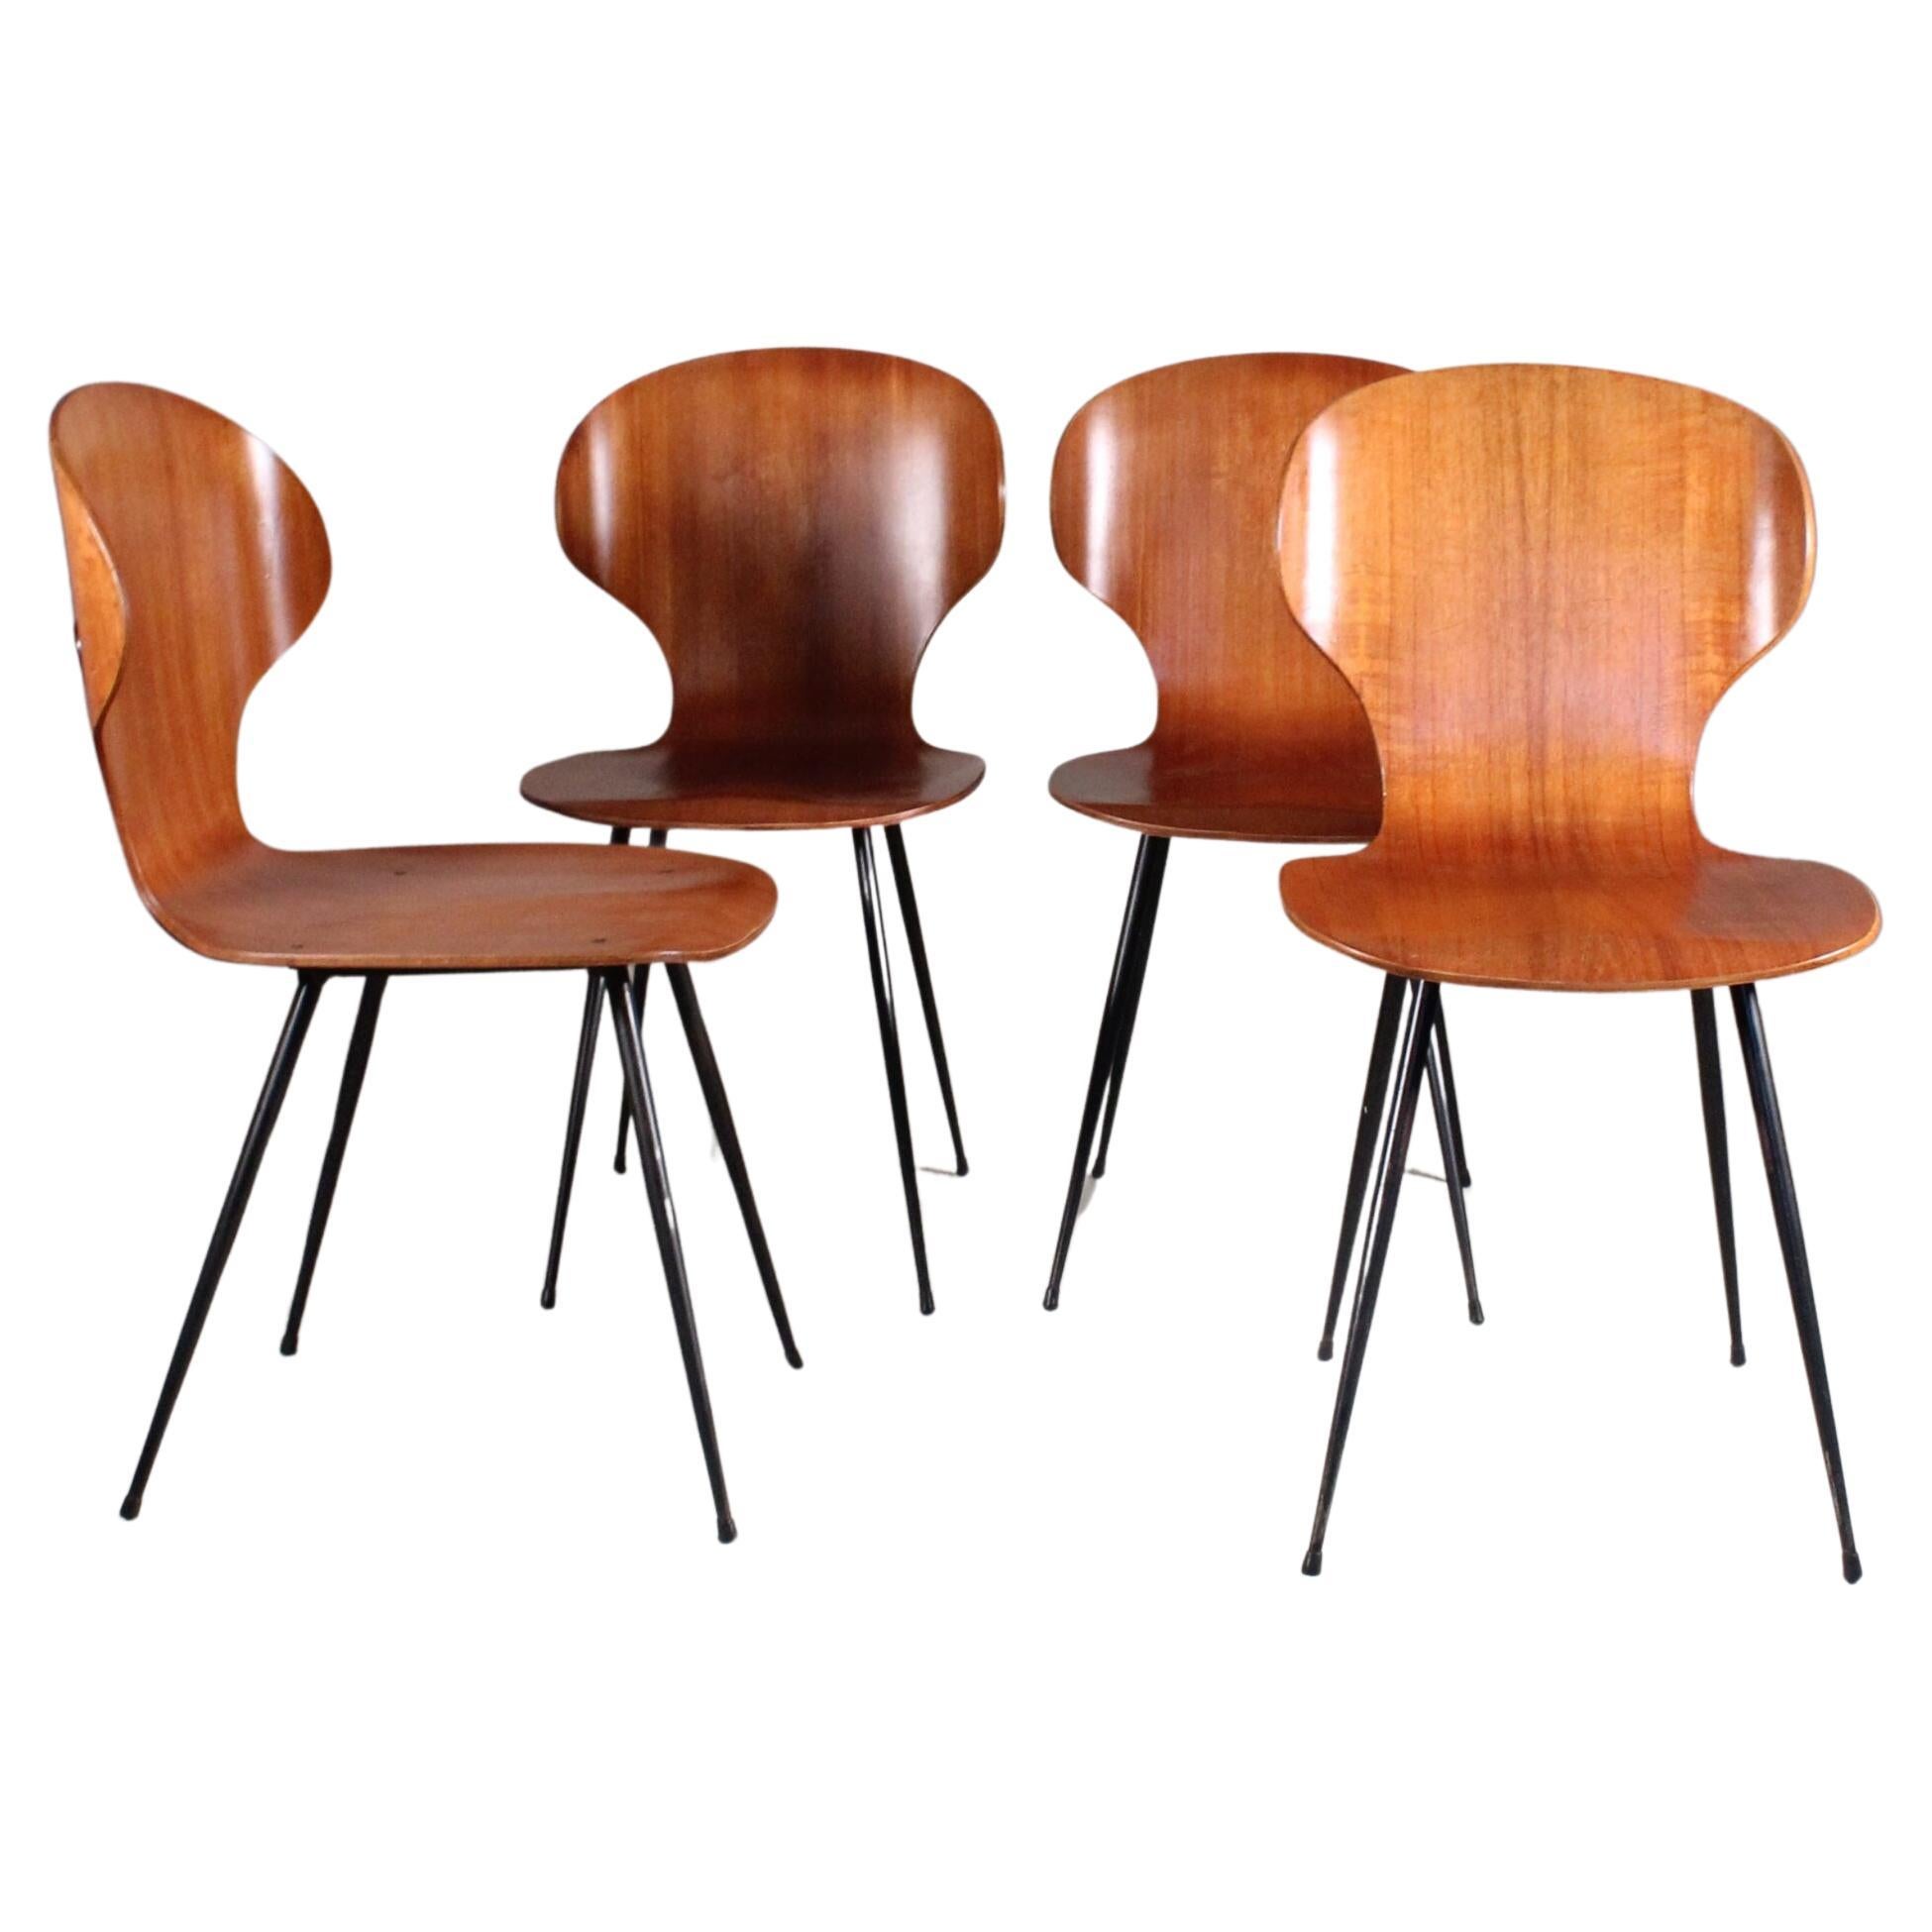 Set of 4 Lulli Chairs, Carlo Ratti, Curved Woods Industry, 1950s For Sale